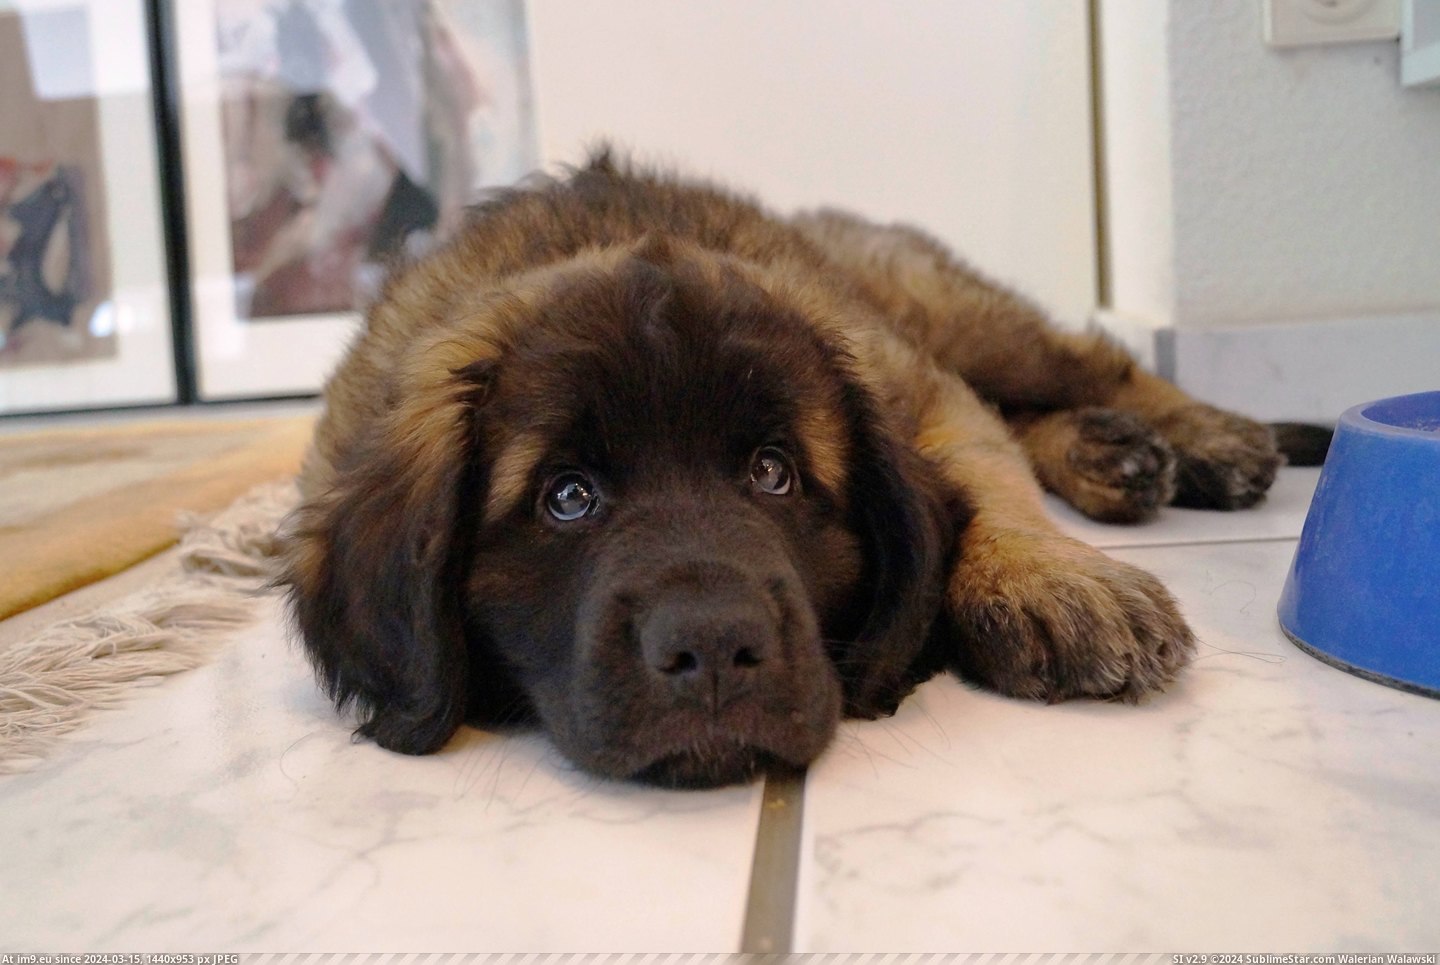 #Puppy #Weeks #Pounds #Cub #Leonberger #Father #Bear [Aww] Father just got a Leonberger puppy. 9 weeks, 19 pounds already. Like a little bear cub. Pic. (Image of album My r/AWW favs))